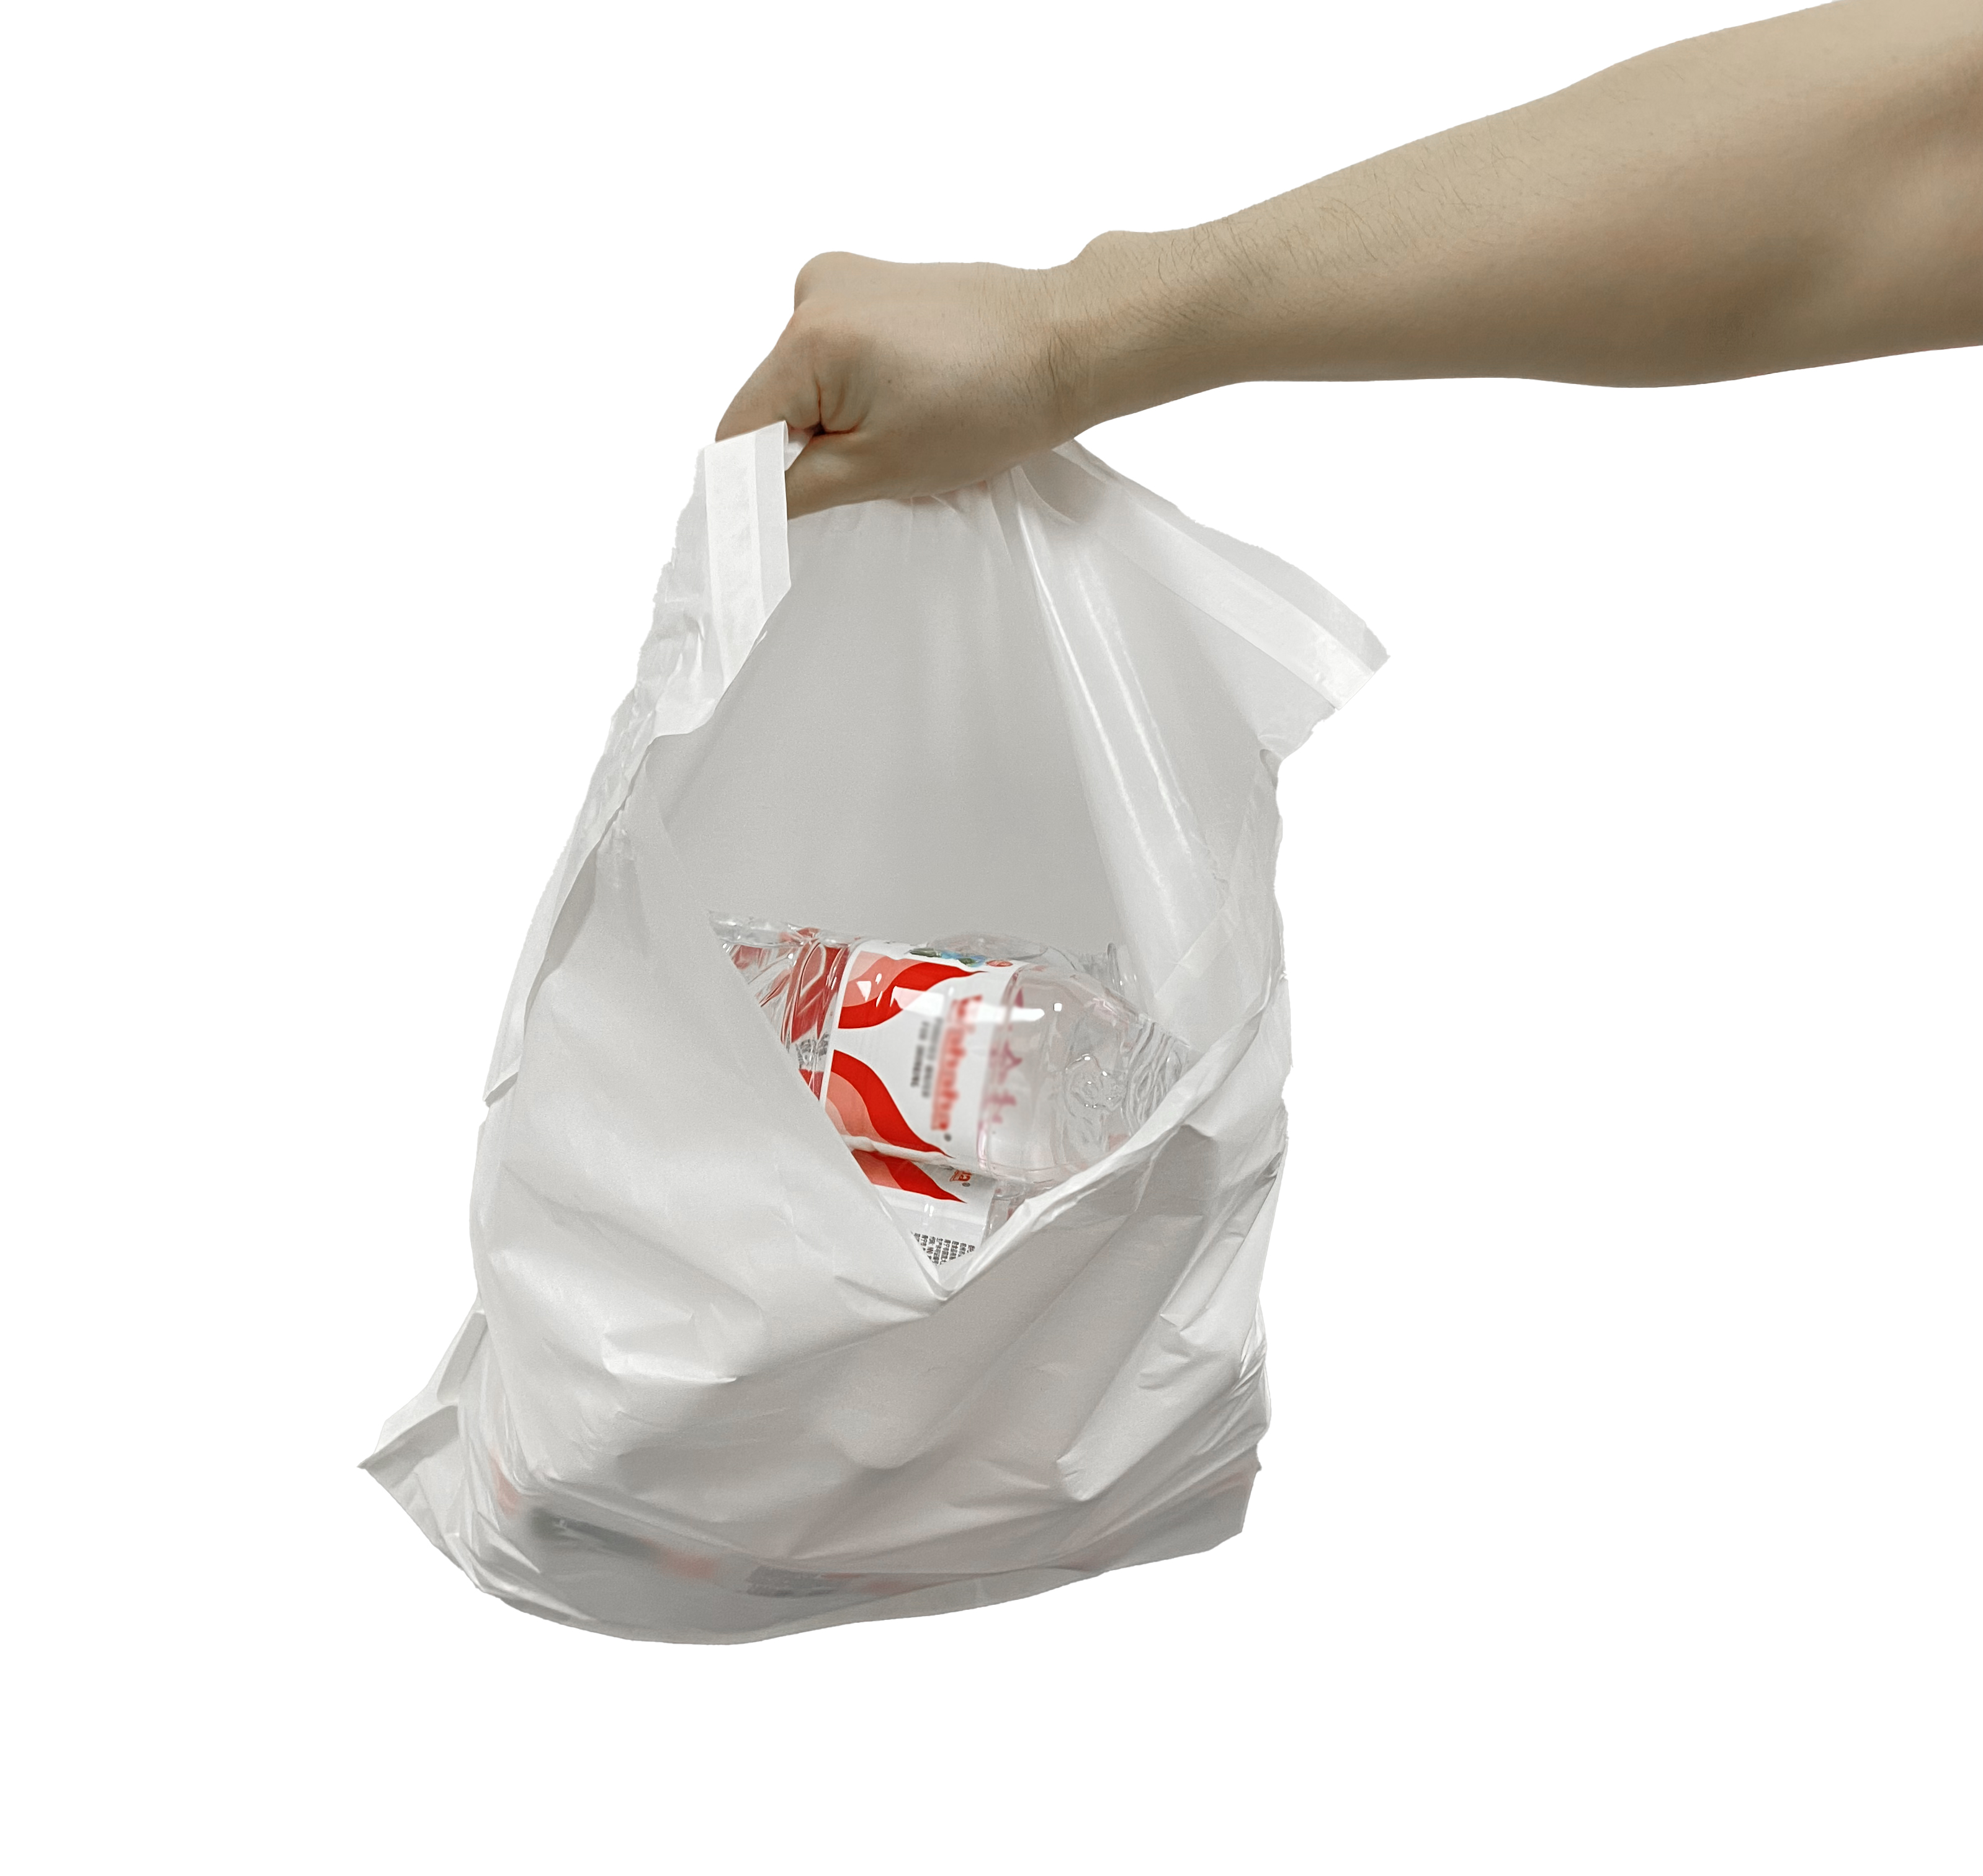 Quality standards for Glasin paper bags